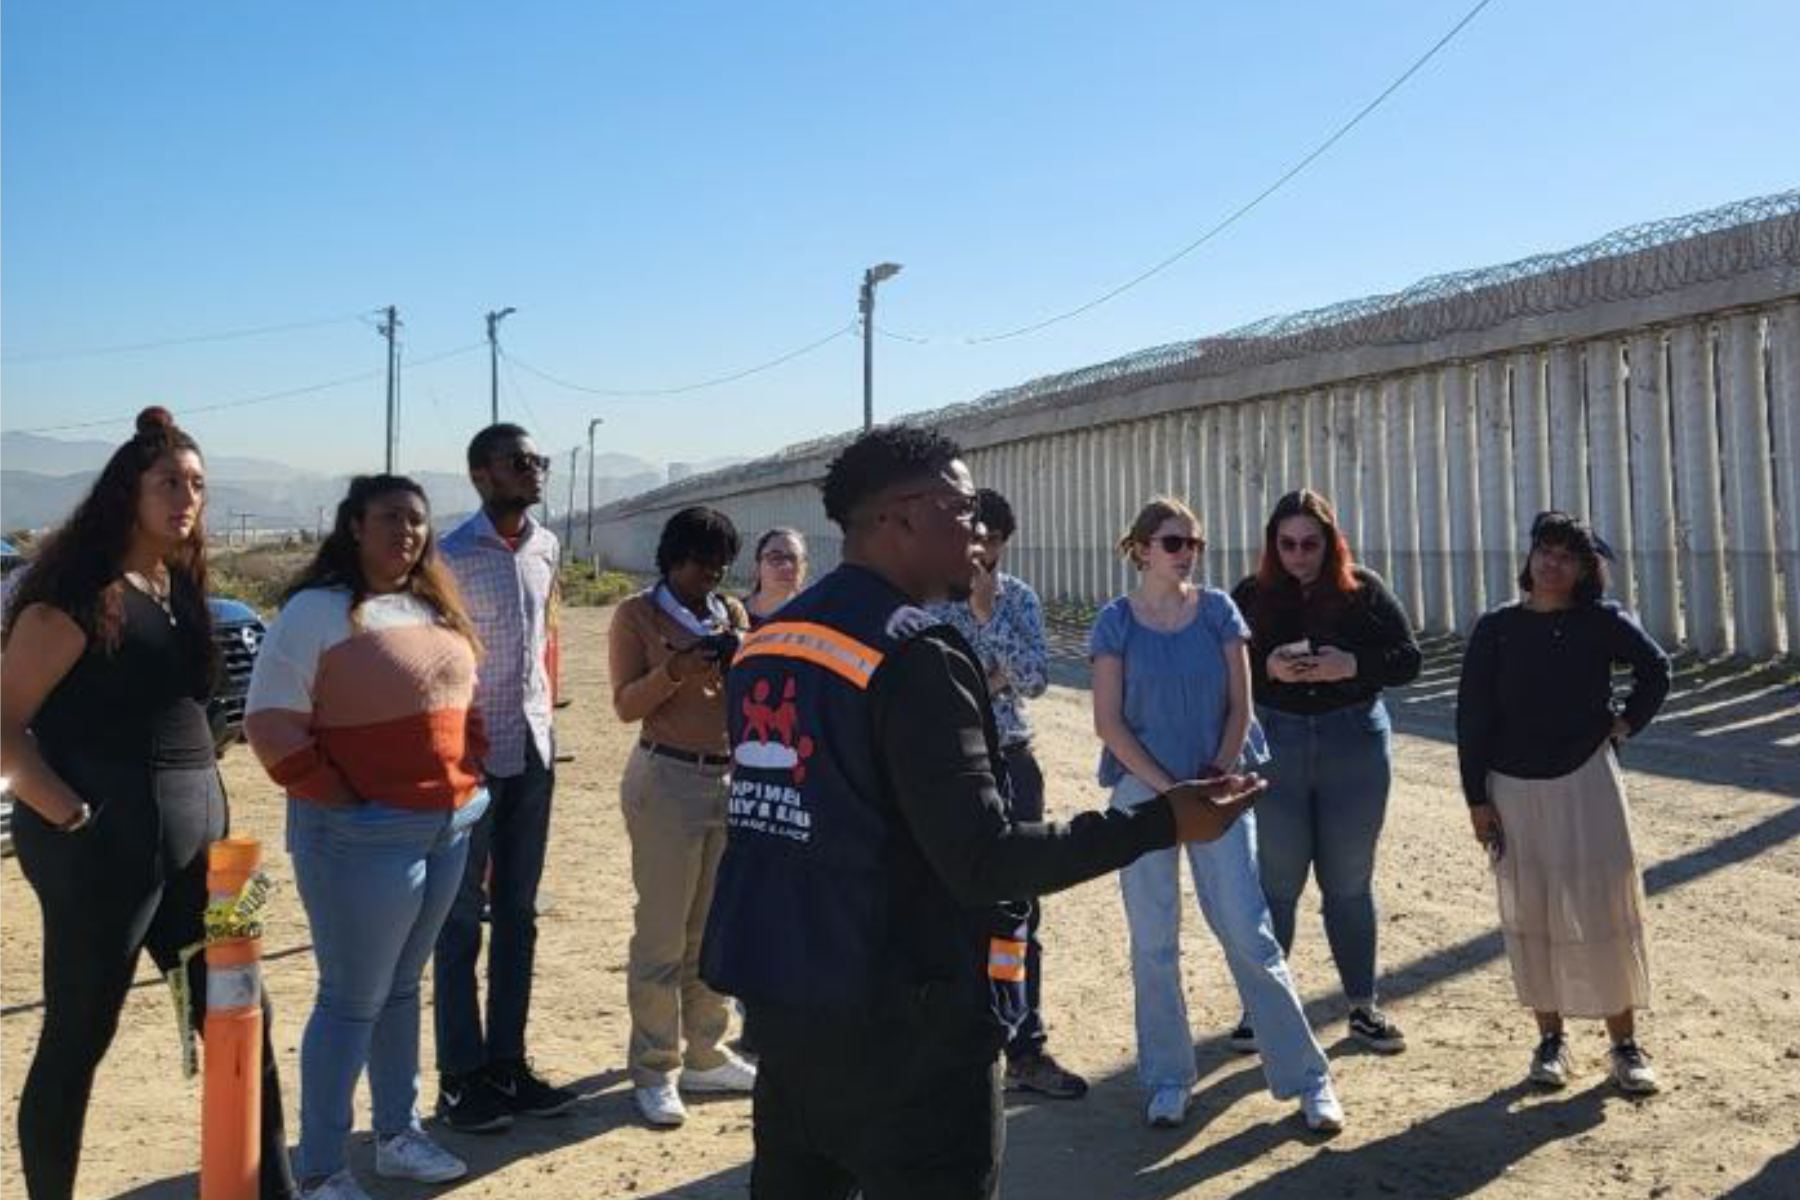 a group of people listen to a man talking. a wall with barbed wire is in the background